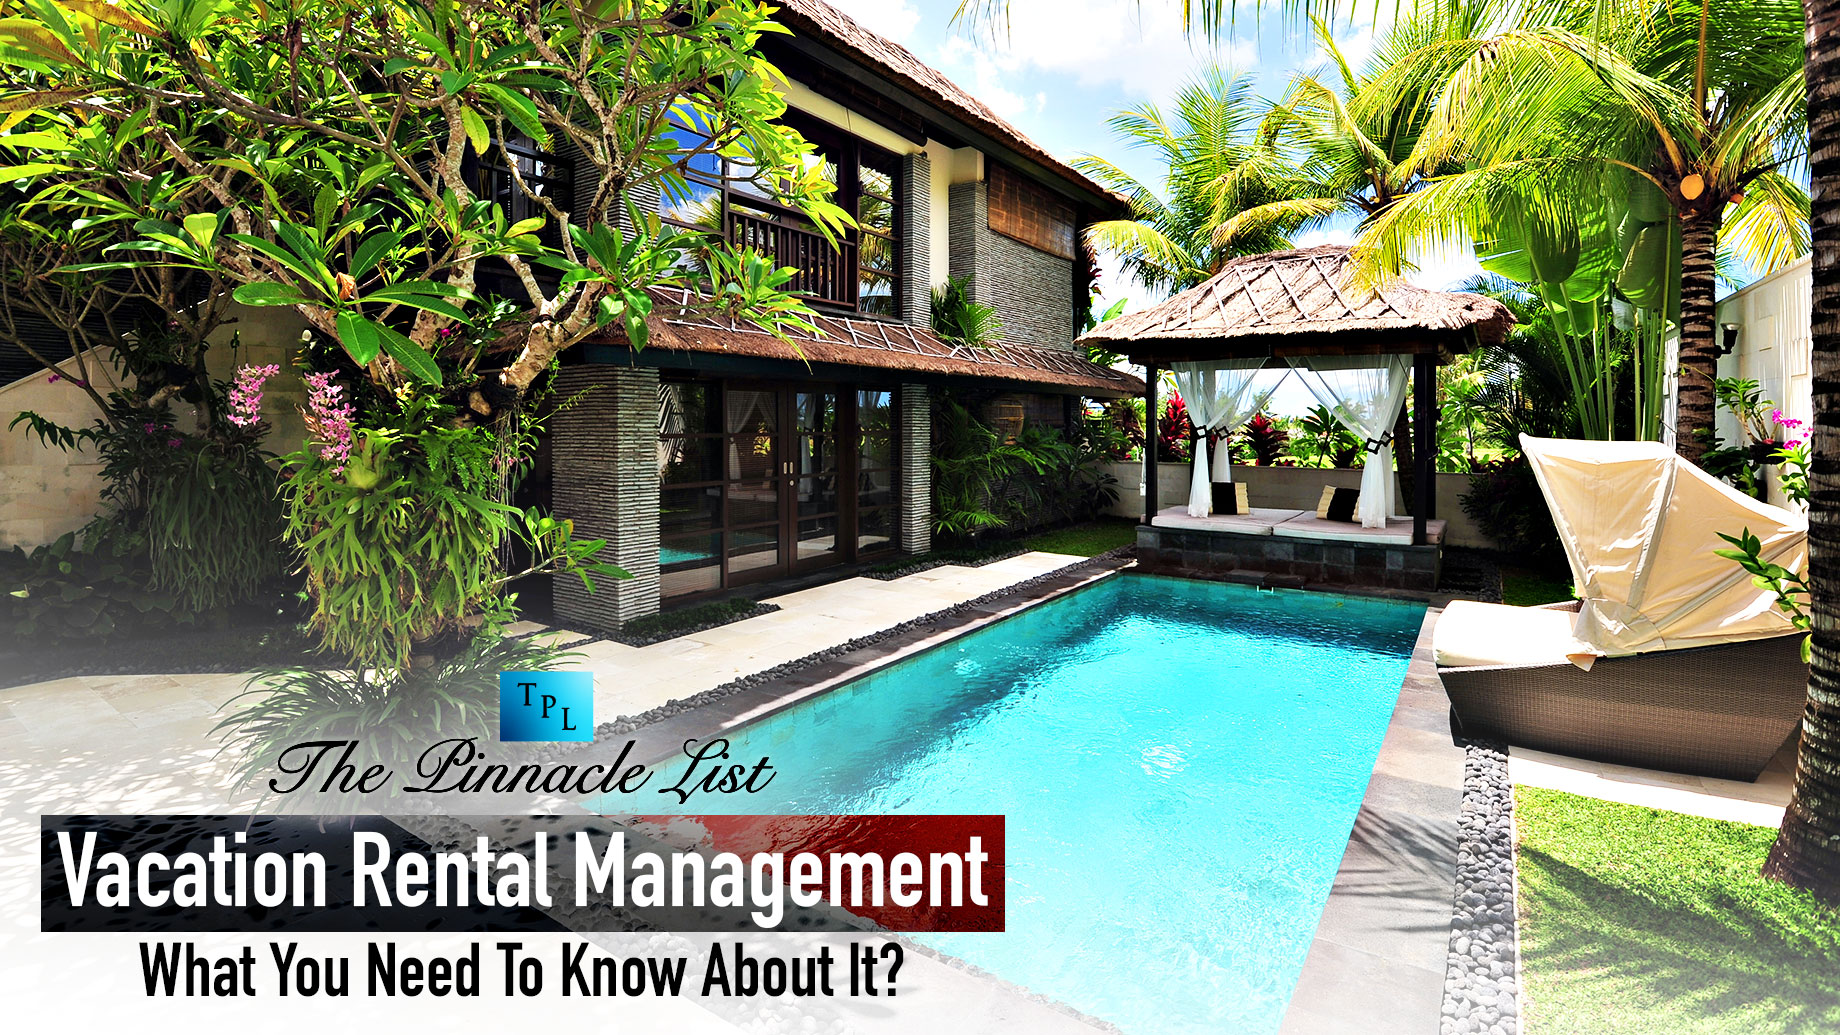 Vacation Rental Management: What You Need To Know About It?